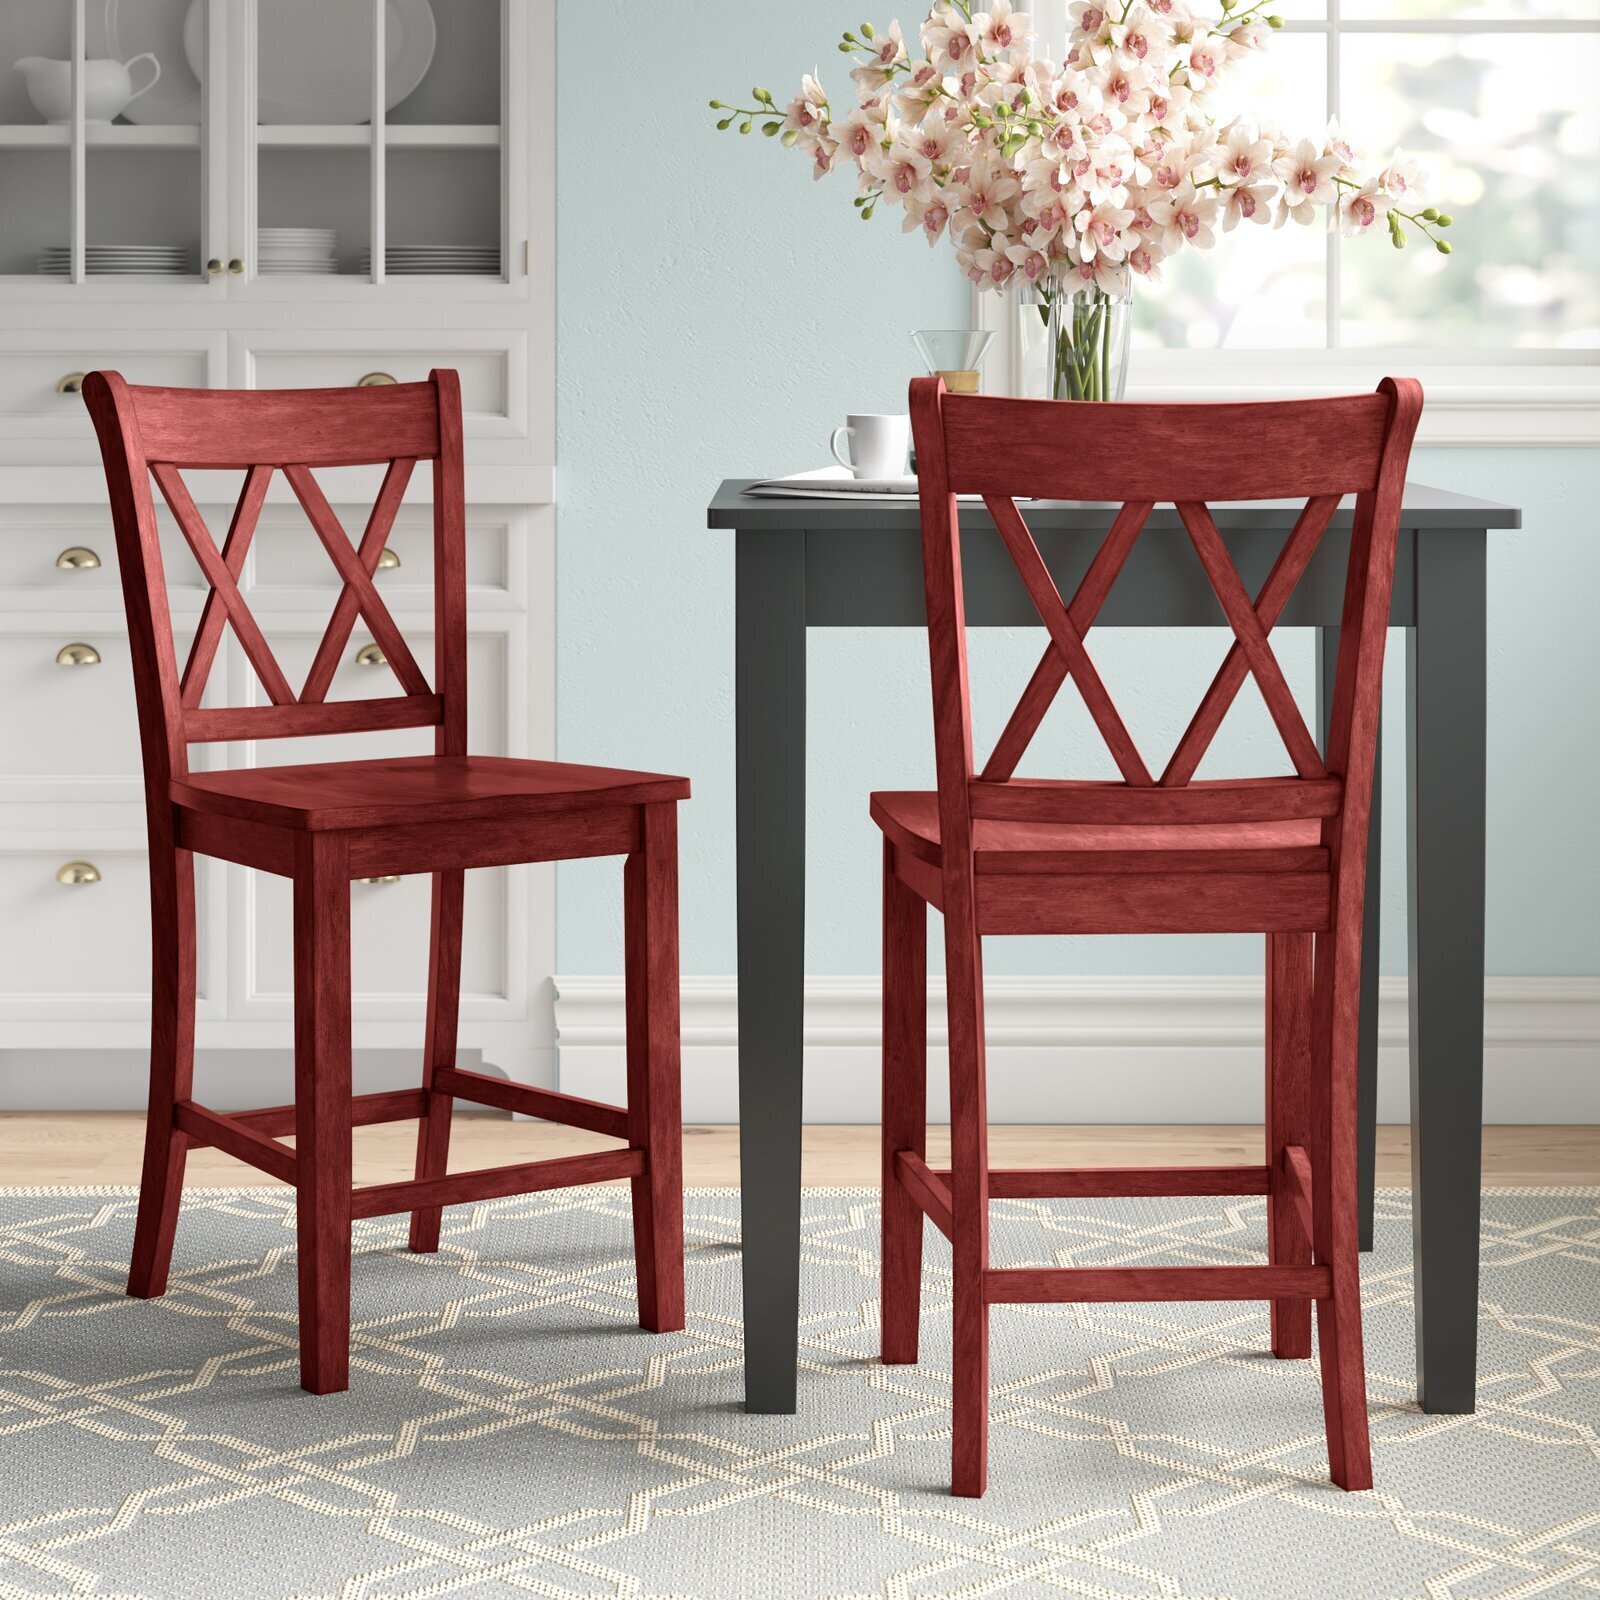 Shaker counter stools in a traditional design